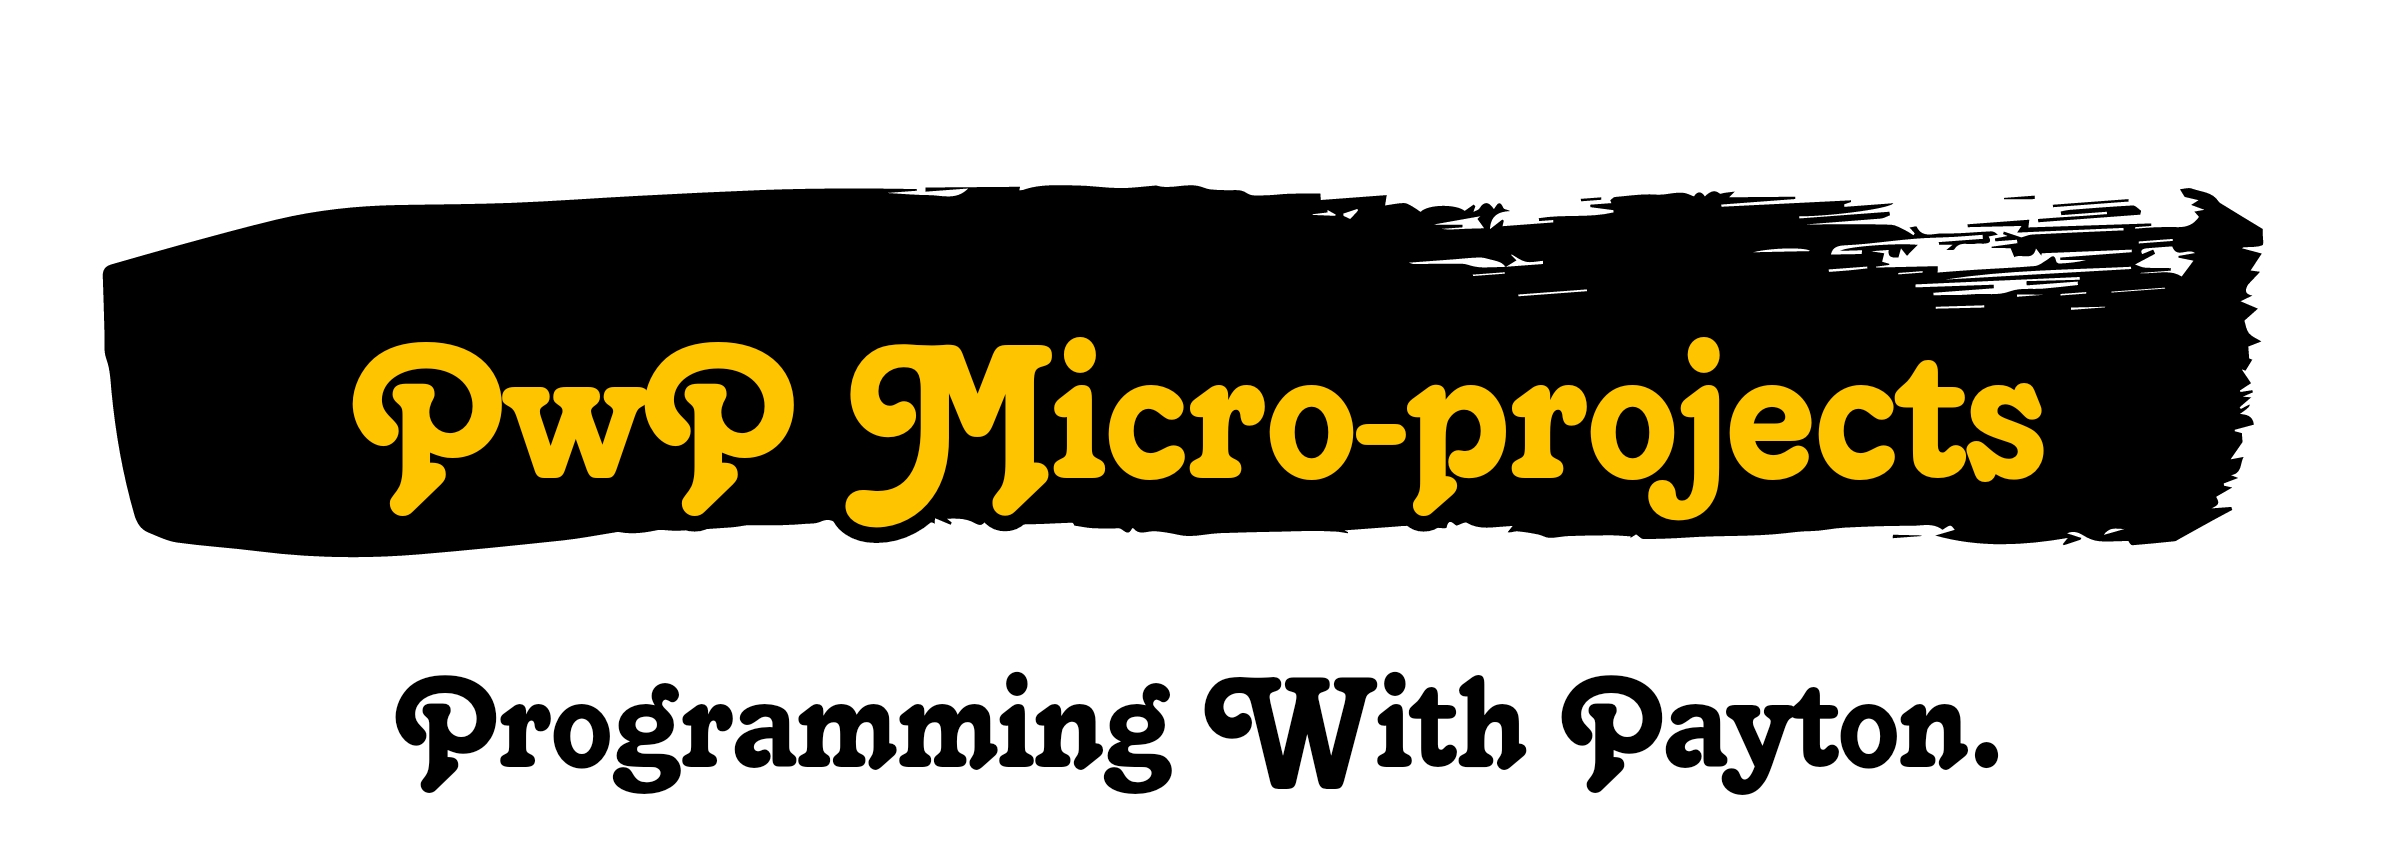 Msbte PWP Micro-projects